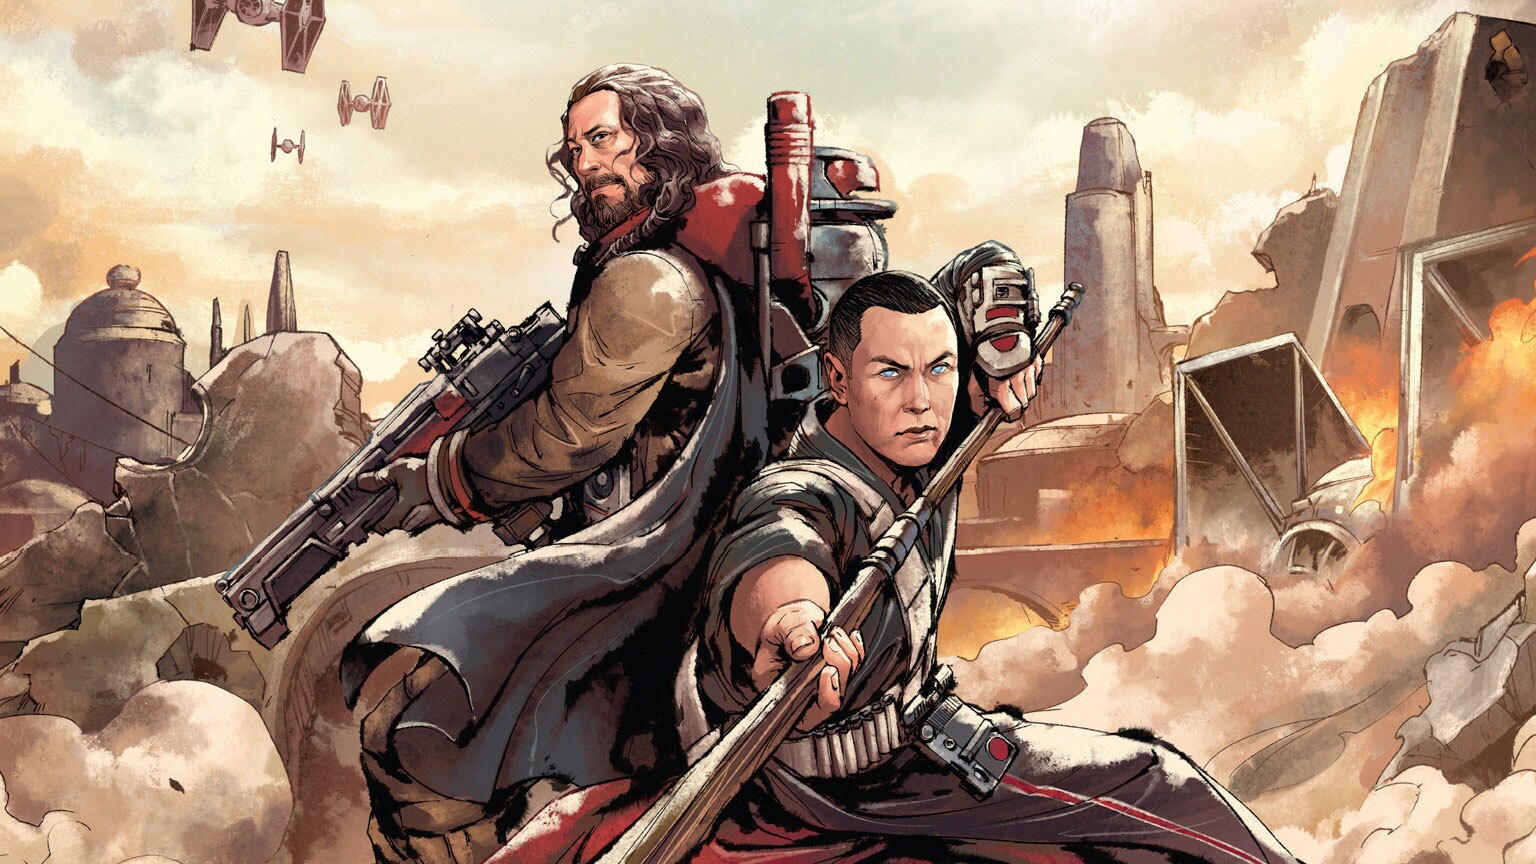 Chirrut and Baze Journey Through Jedha in Guardians of the Whills - Exclusive Excerpt